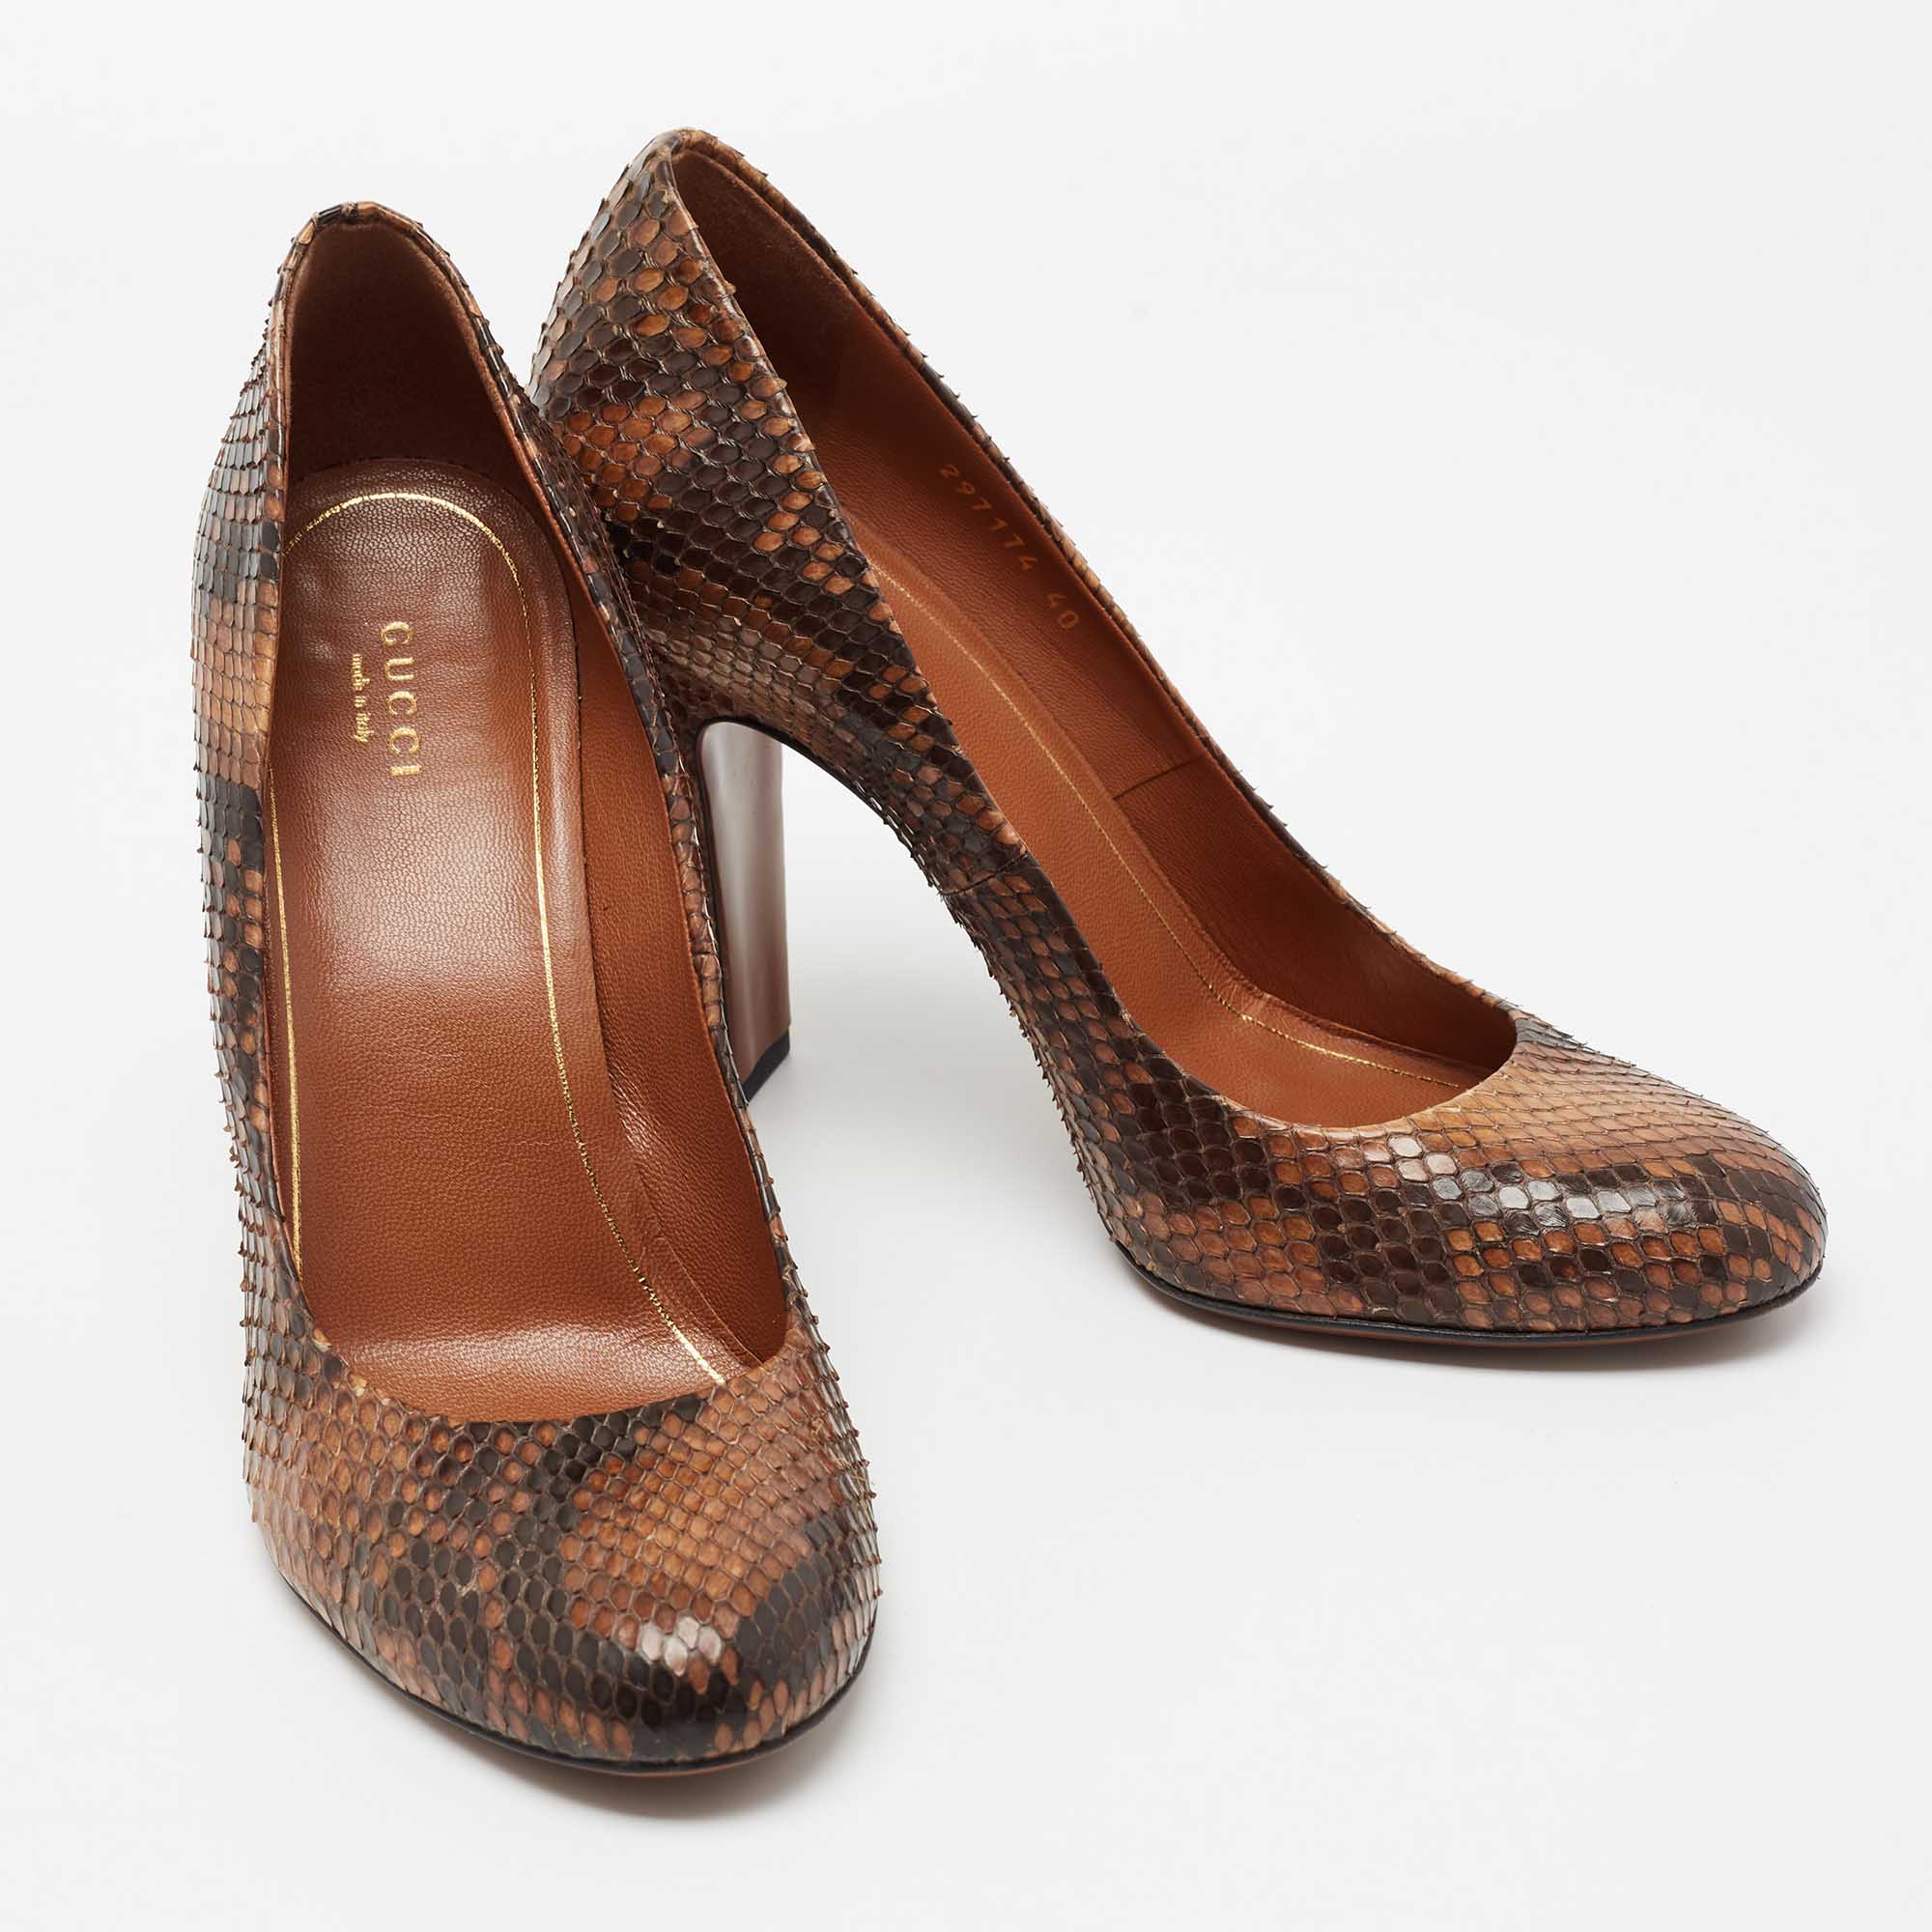 Gucci Brown/Black Python Leather Studded Heel Pumps Size 40